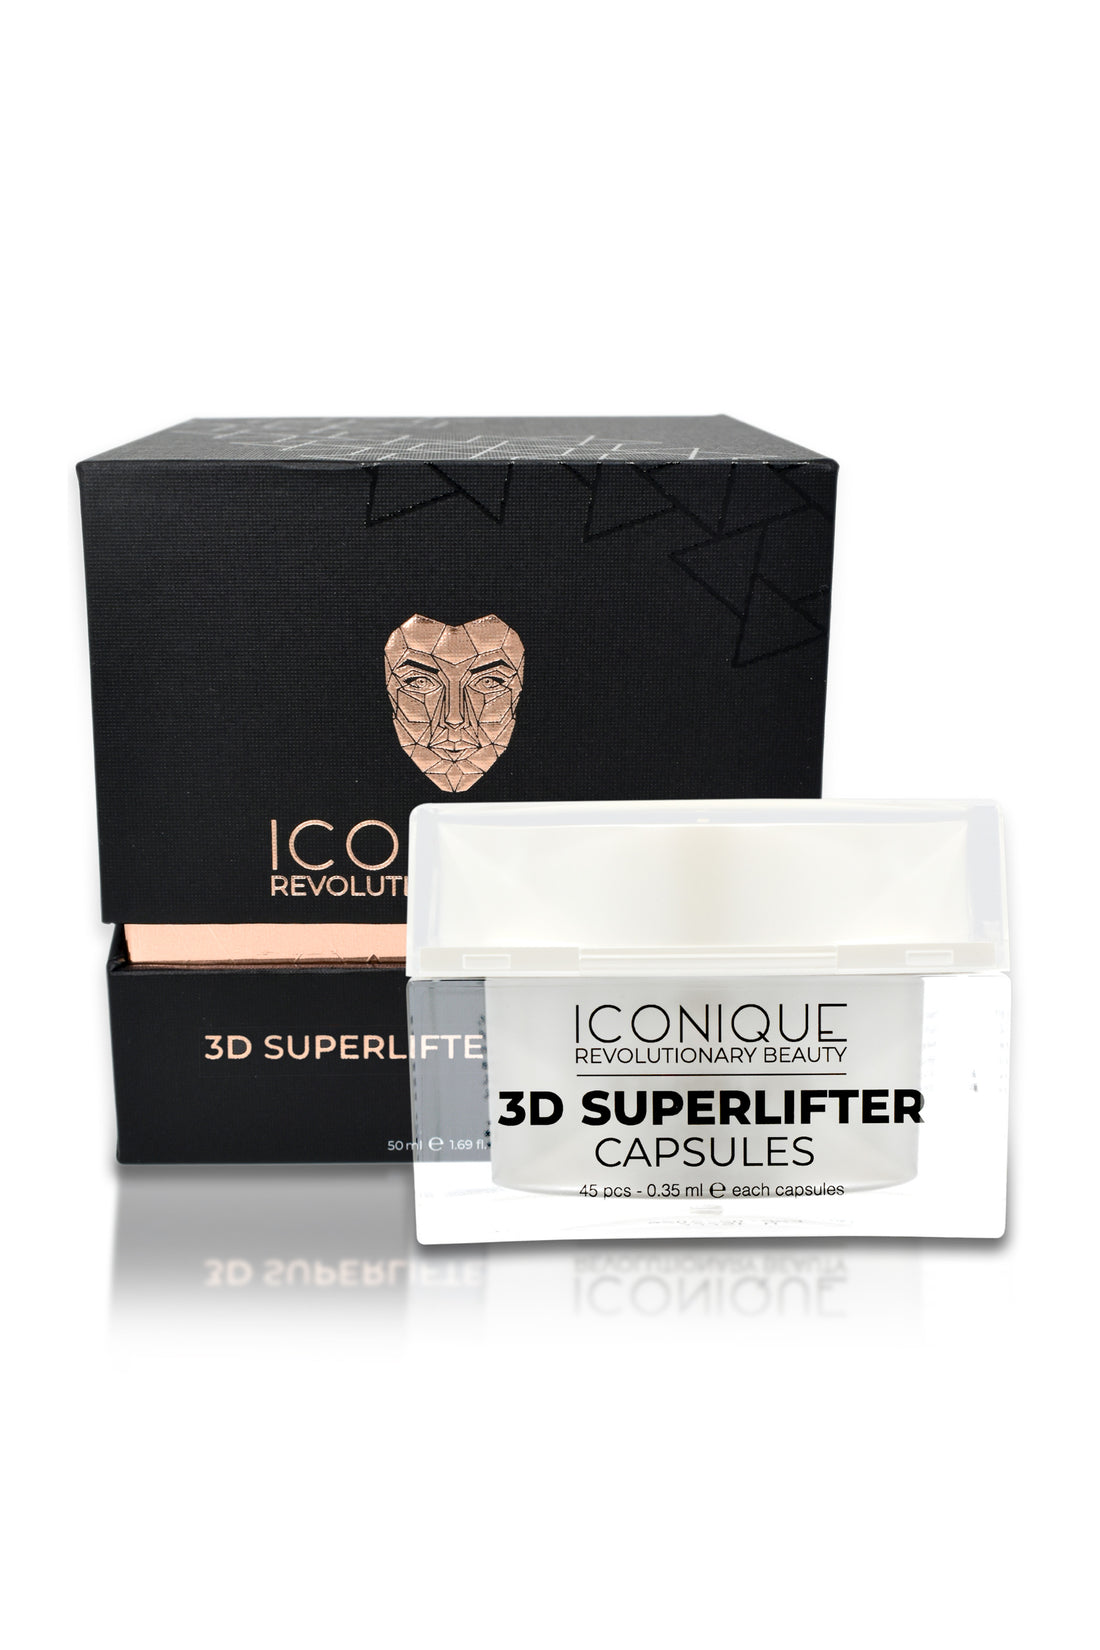 3D SUPERLIFTER CAPSULES